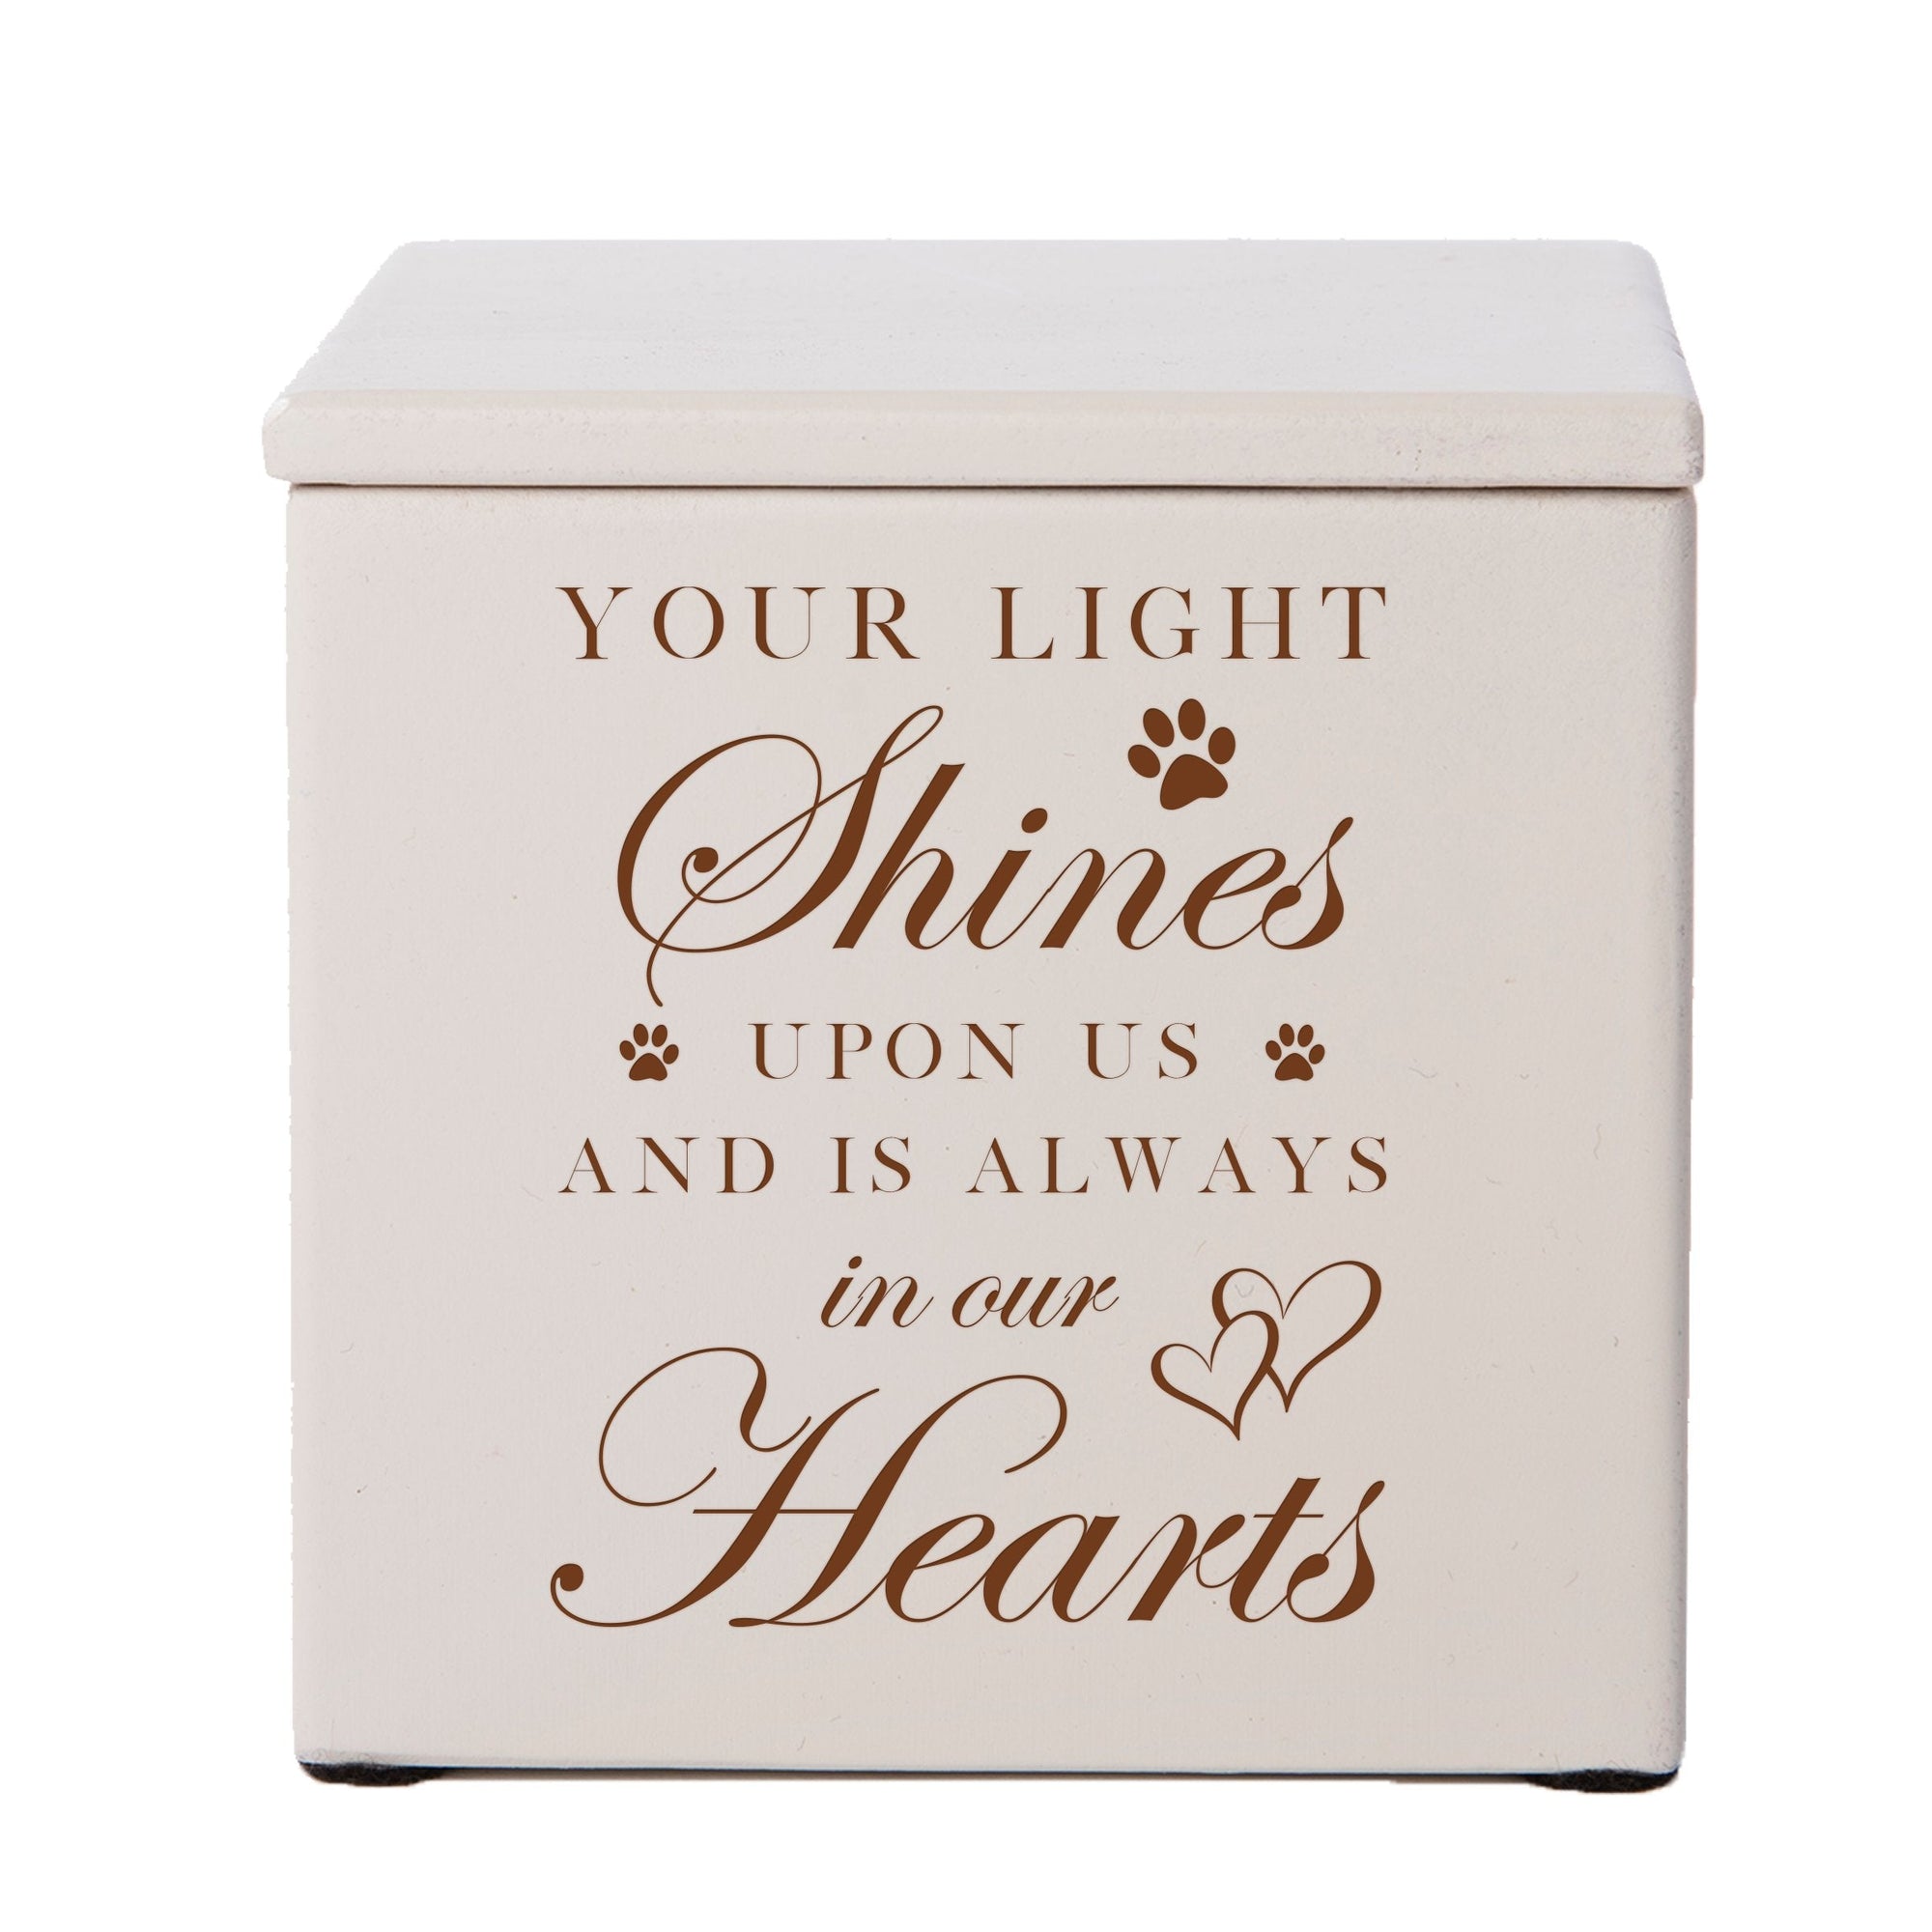 Ivory Pet Memorial 3.5x3.5 Keepsake Urn with phrase "Your Light Shines"